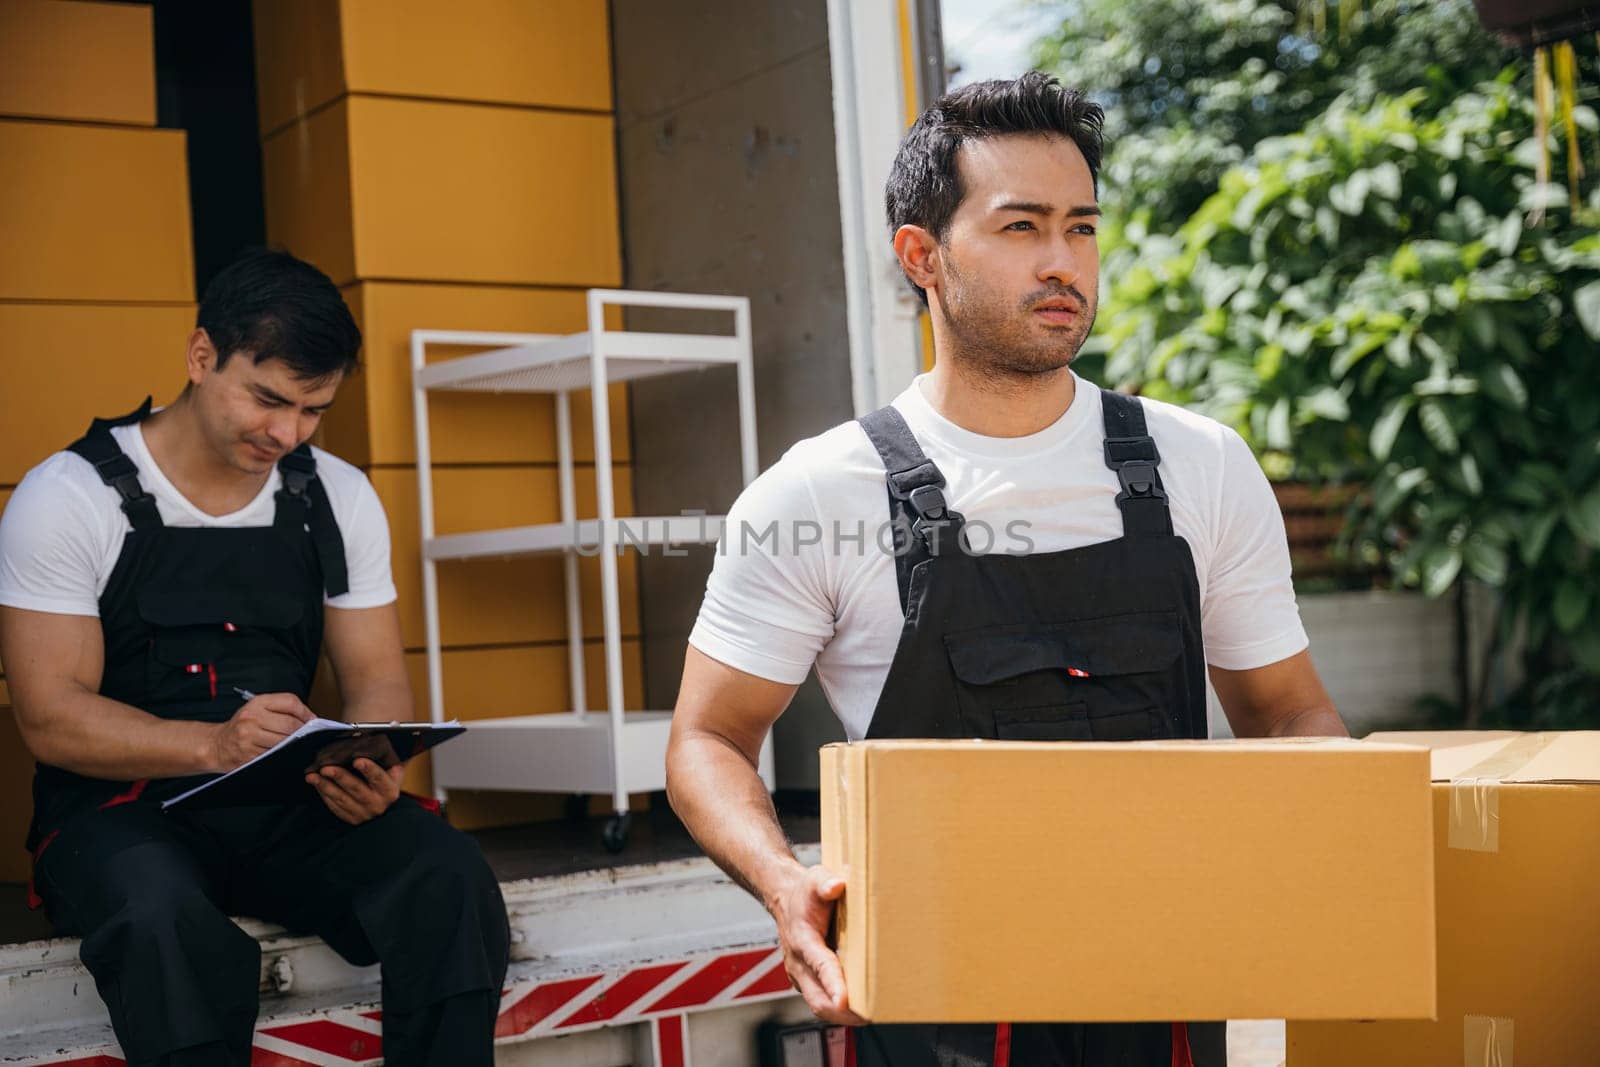 Mover workers in uniform unload boxes checking shipment with a clipboard at the truck. Expert movers ensure efficient moving and professional service. Moving day concept